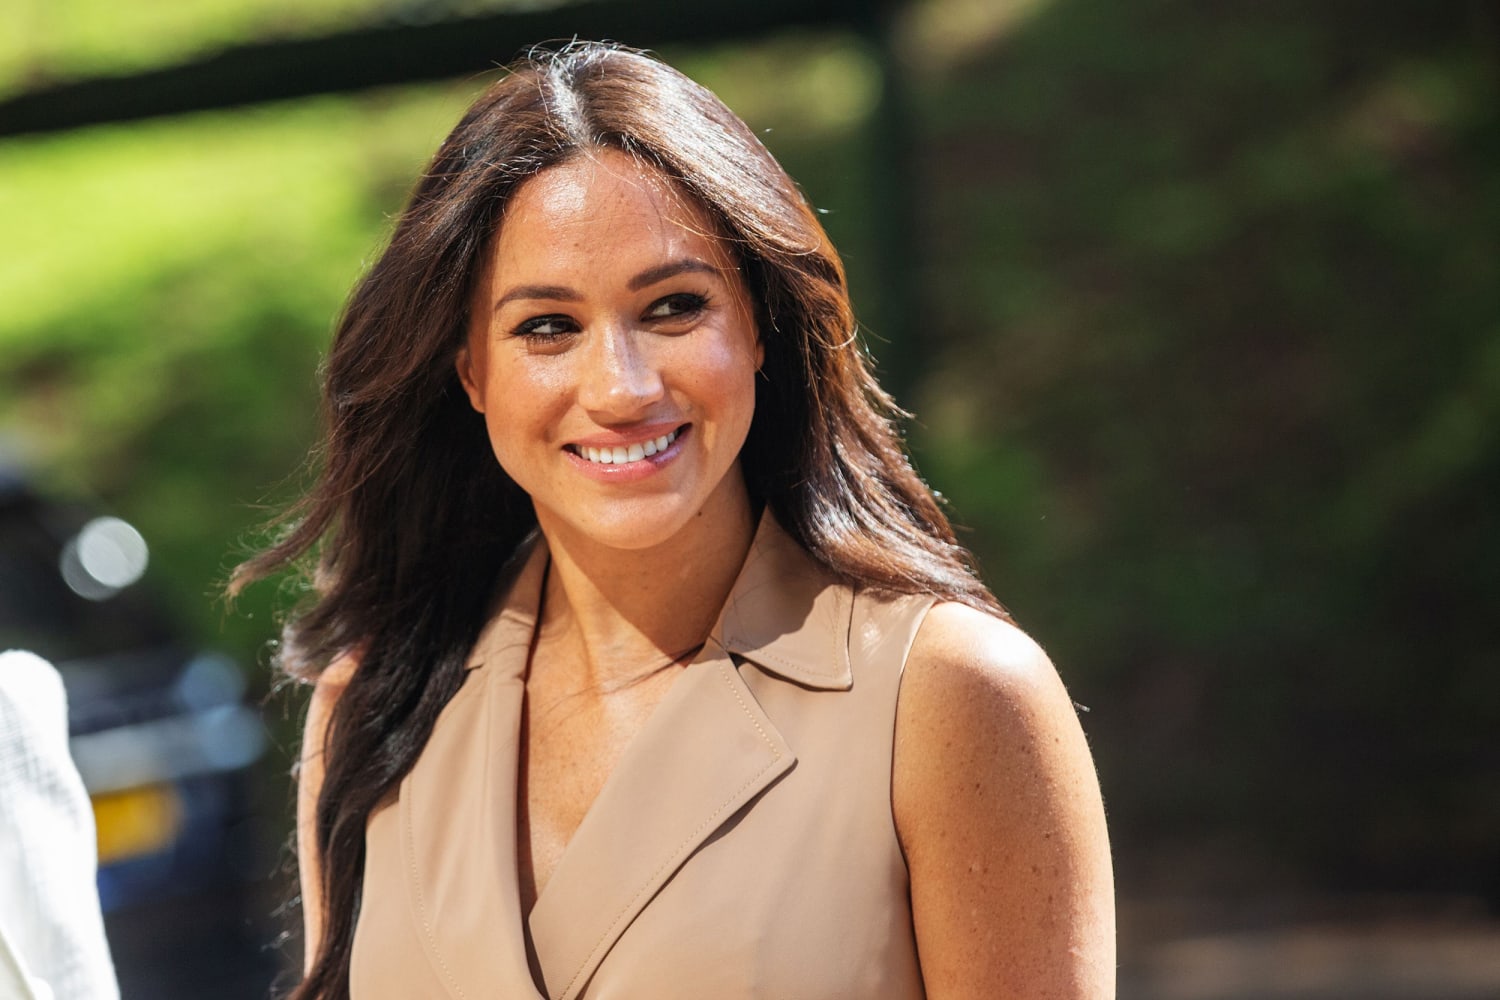 Meghan Markle Says She Suffered Almost Unsurvivable Online Abuse